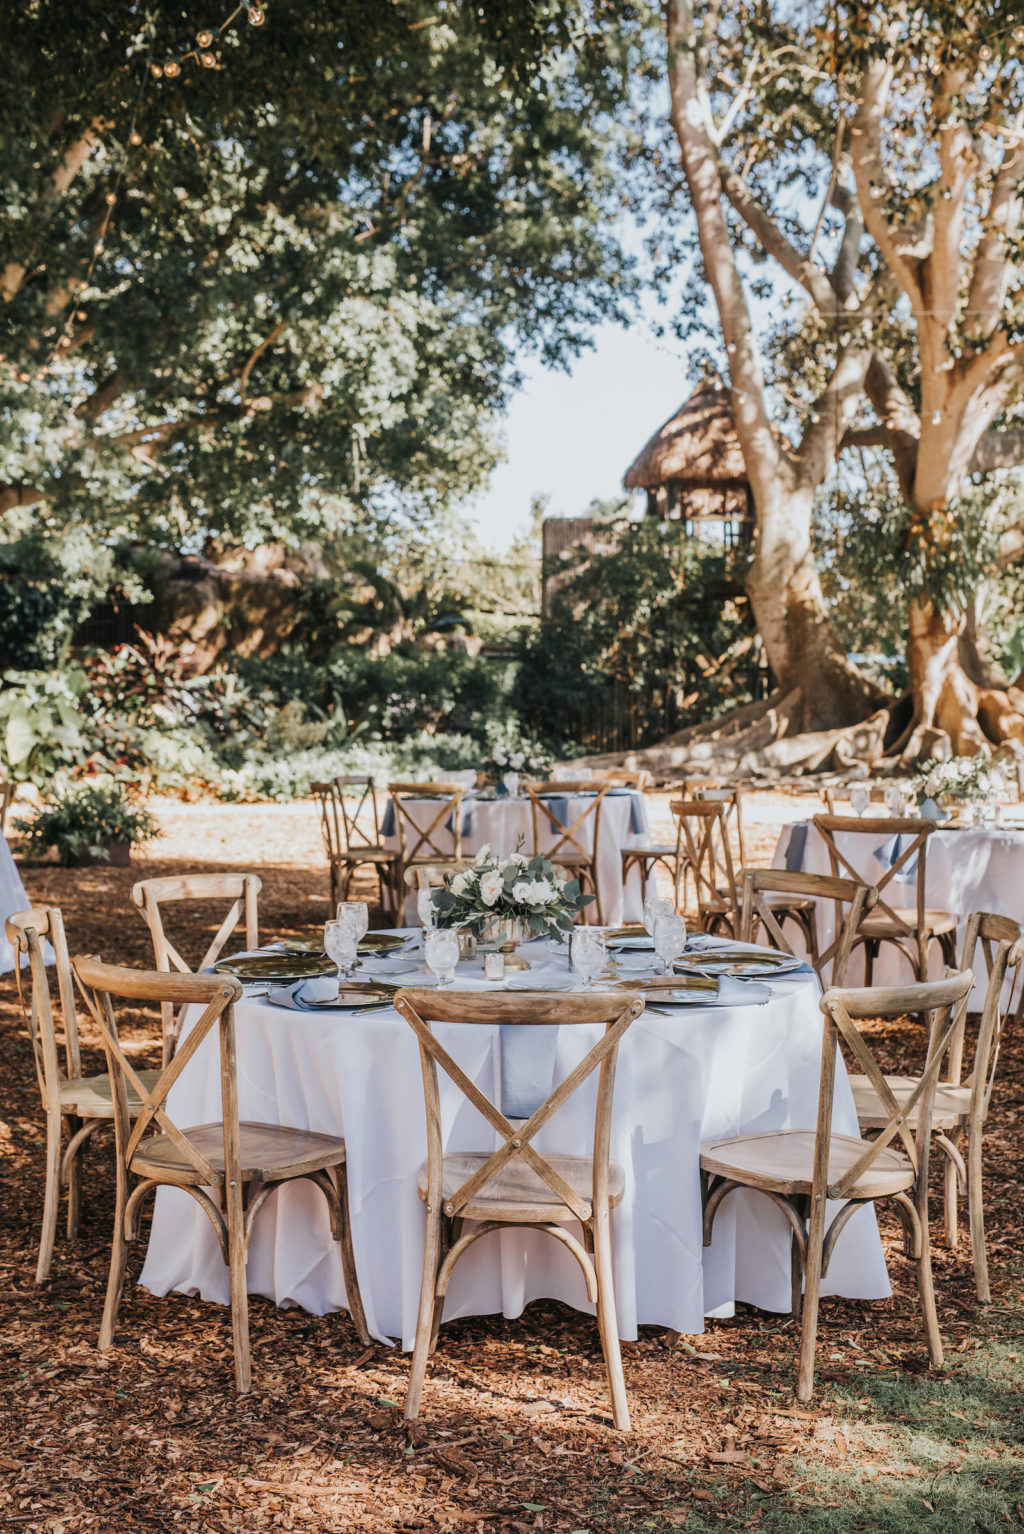 Romantic Rustic Outdoor Garden Wedding Reception with Round Tables, White Linens, and Wooden French Country Chairs | Sarasota Venue Marie Selby Botanical Gardens | Planner Taylored Affairs